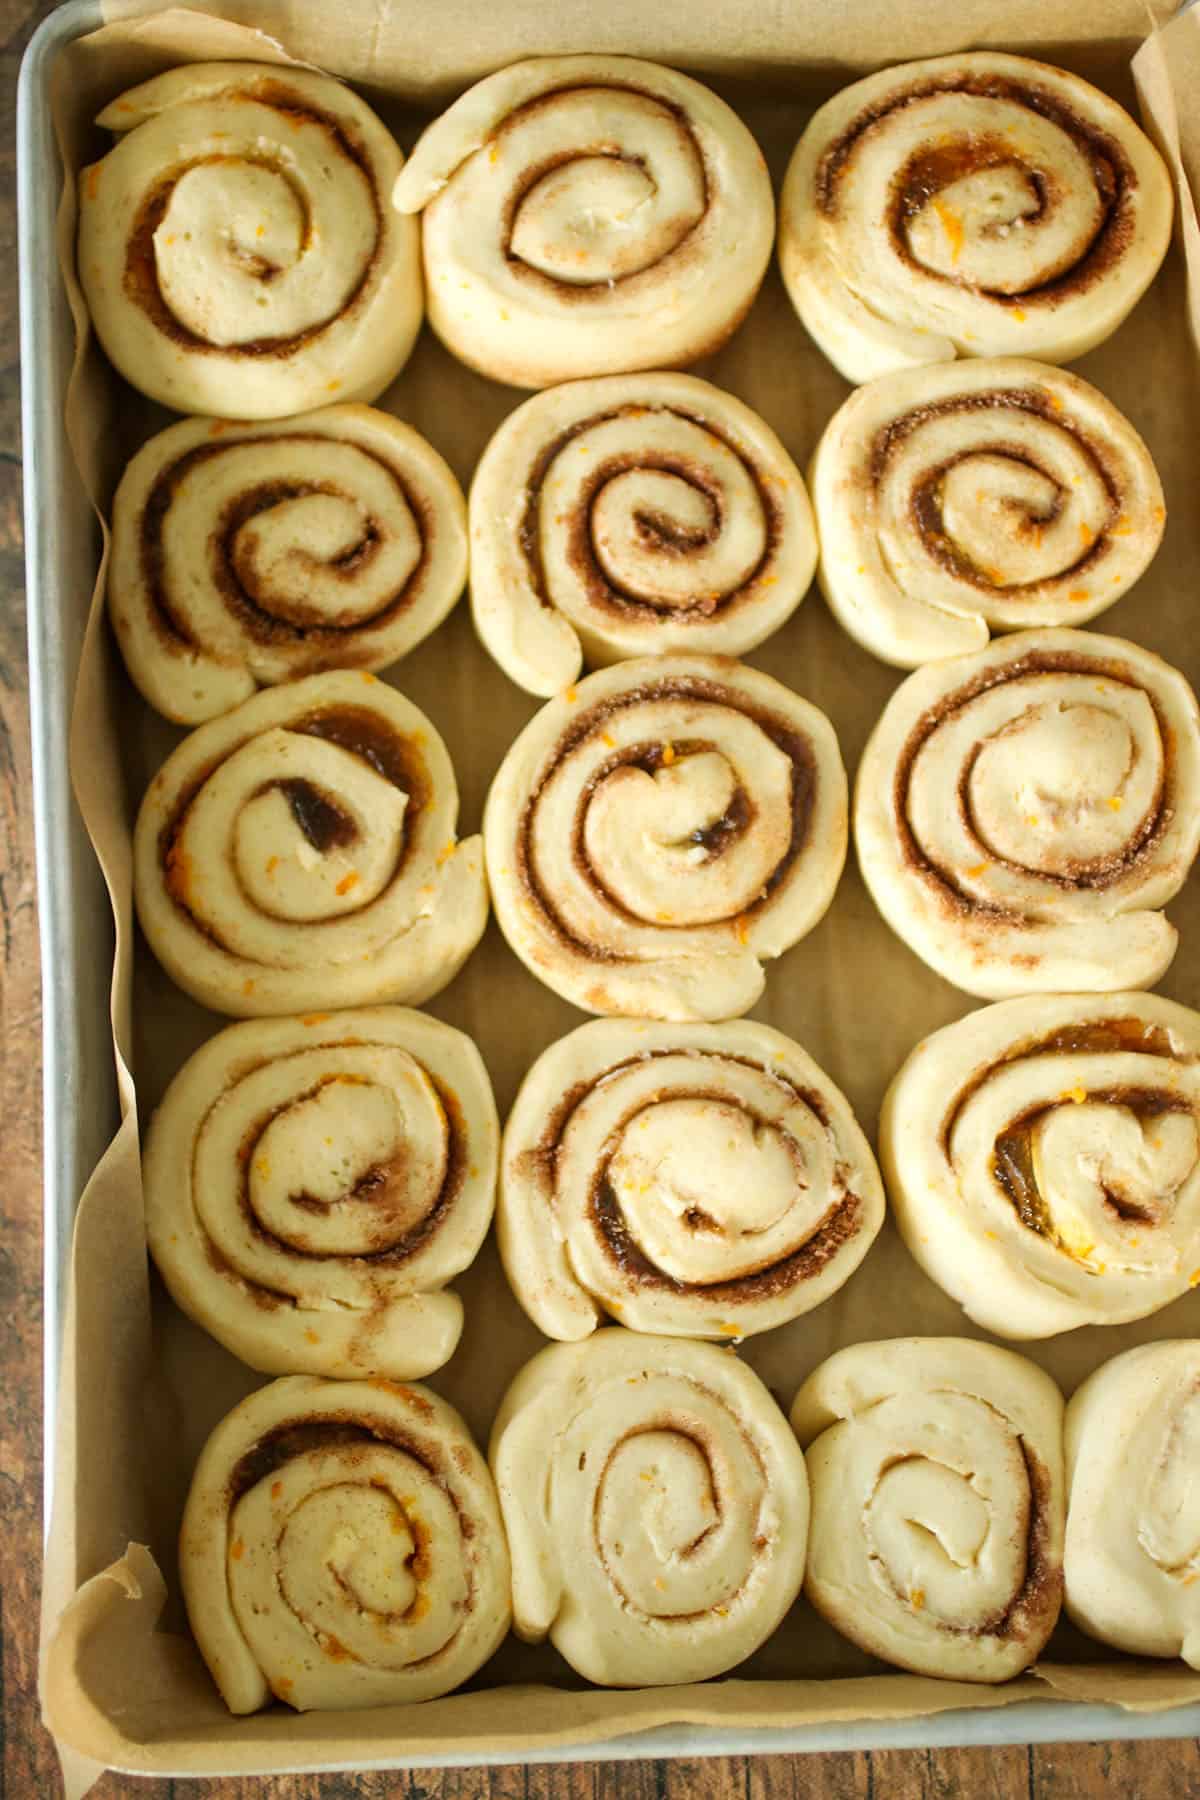 The cinnamon rolls ready for baking.